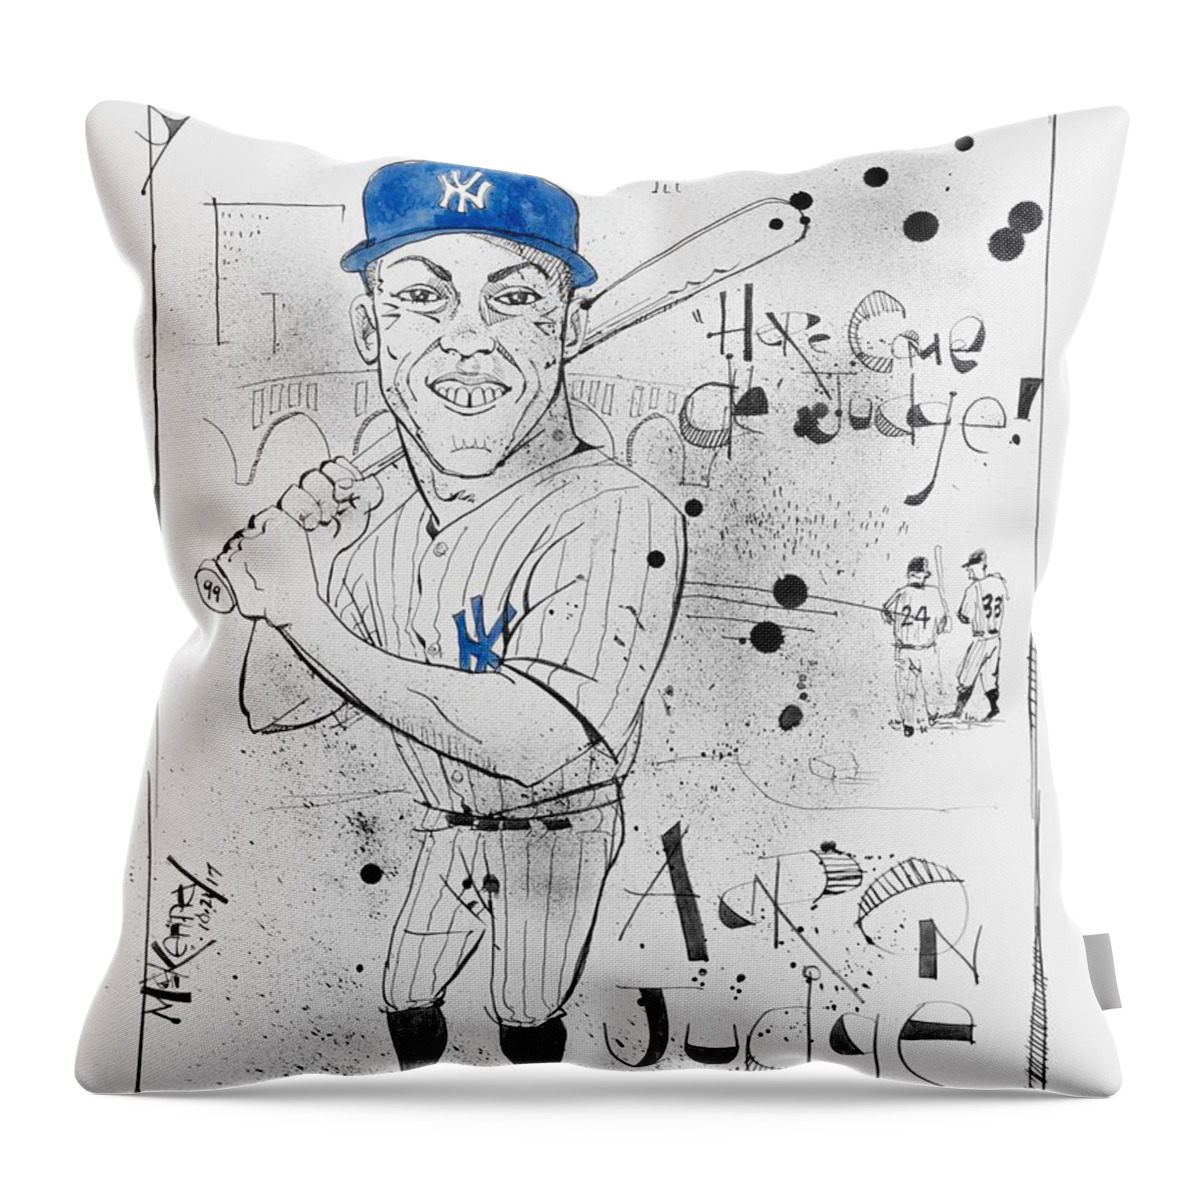  Throw Pillow featuring the drawing Aaron Judge by Phil Mckenney